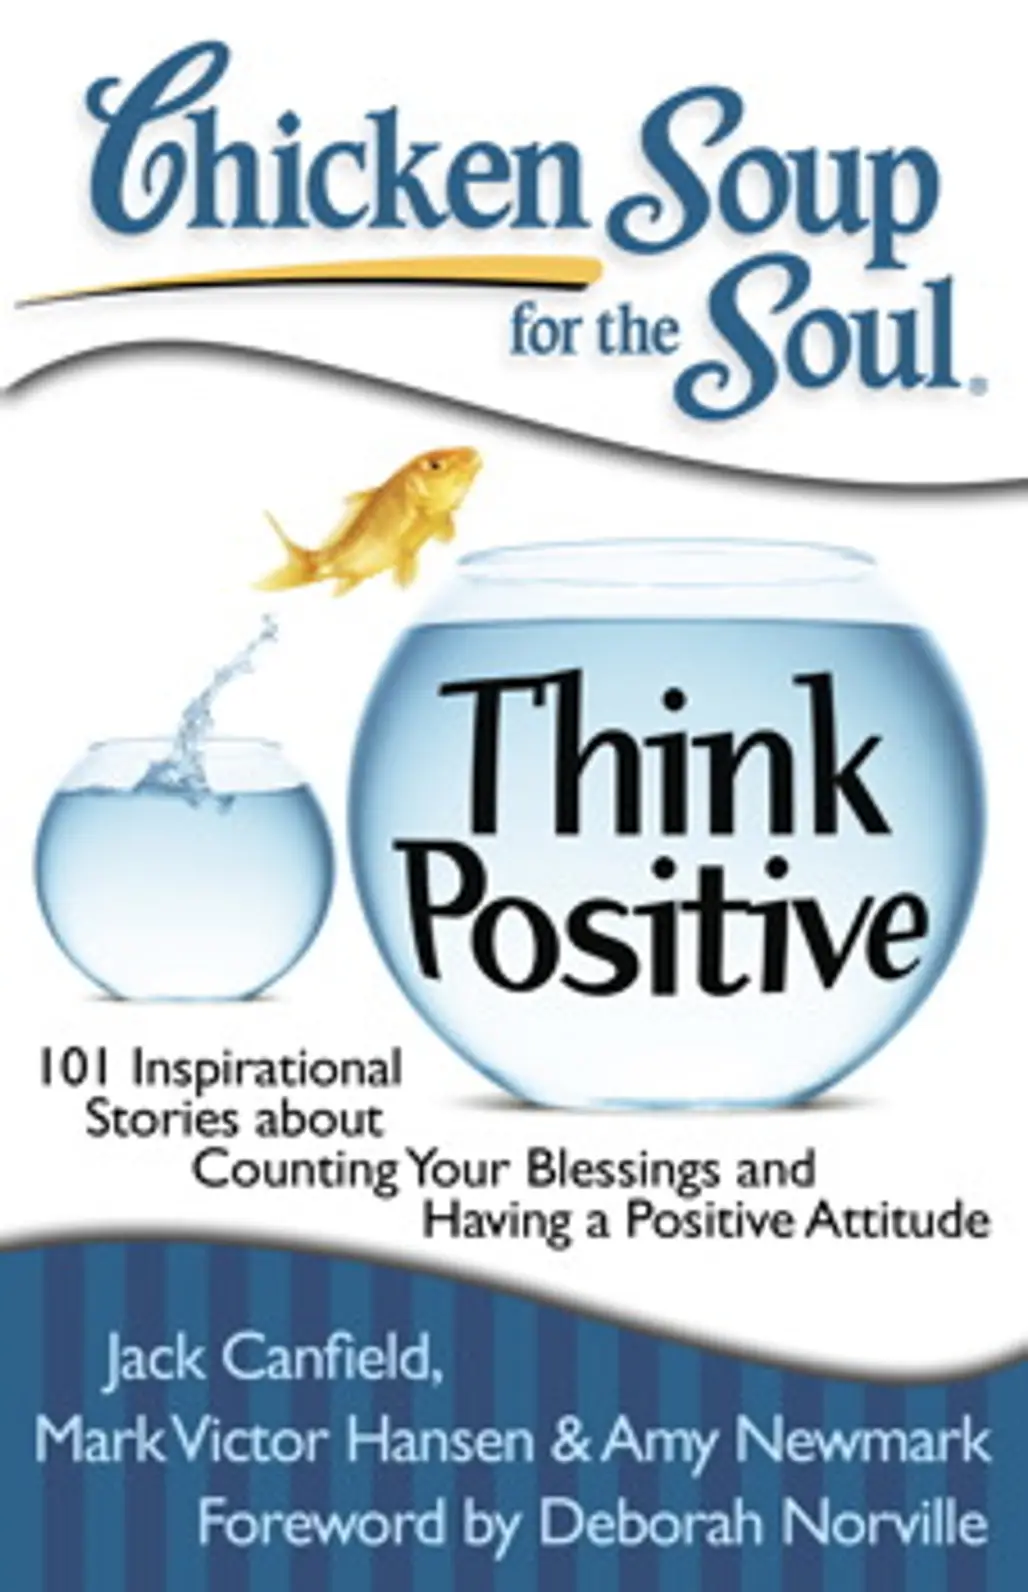 Chicken Soup for the Soul: Think Positive: 101 Inspirational Stories about Counting Your Blessings and Having a Positive Attitude by Jack Canfield, Mark Victor Hansen & Amy Newmark